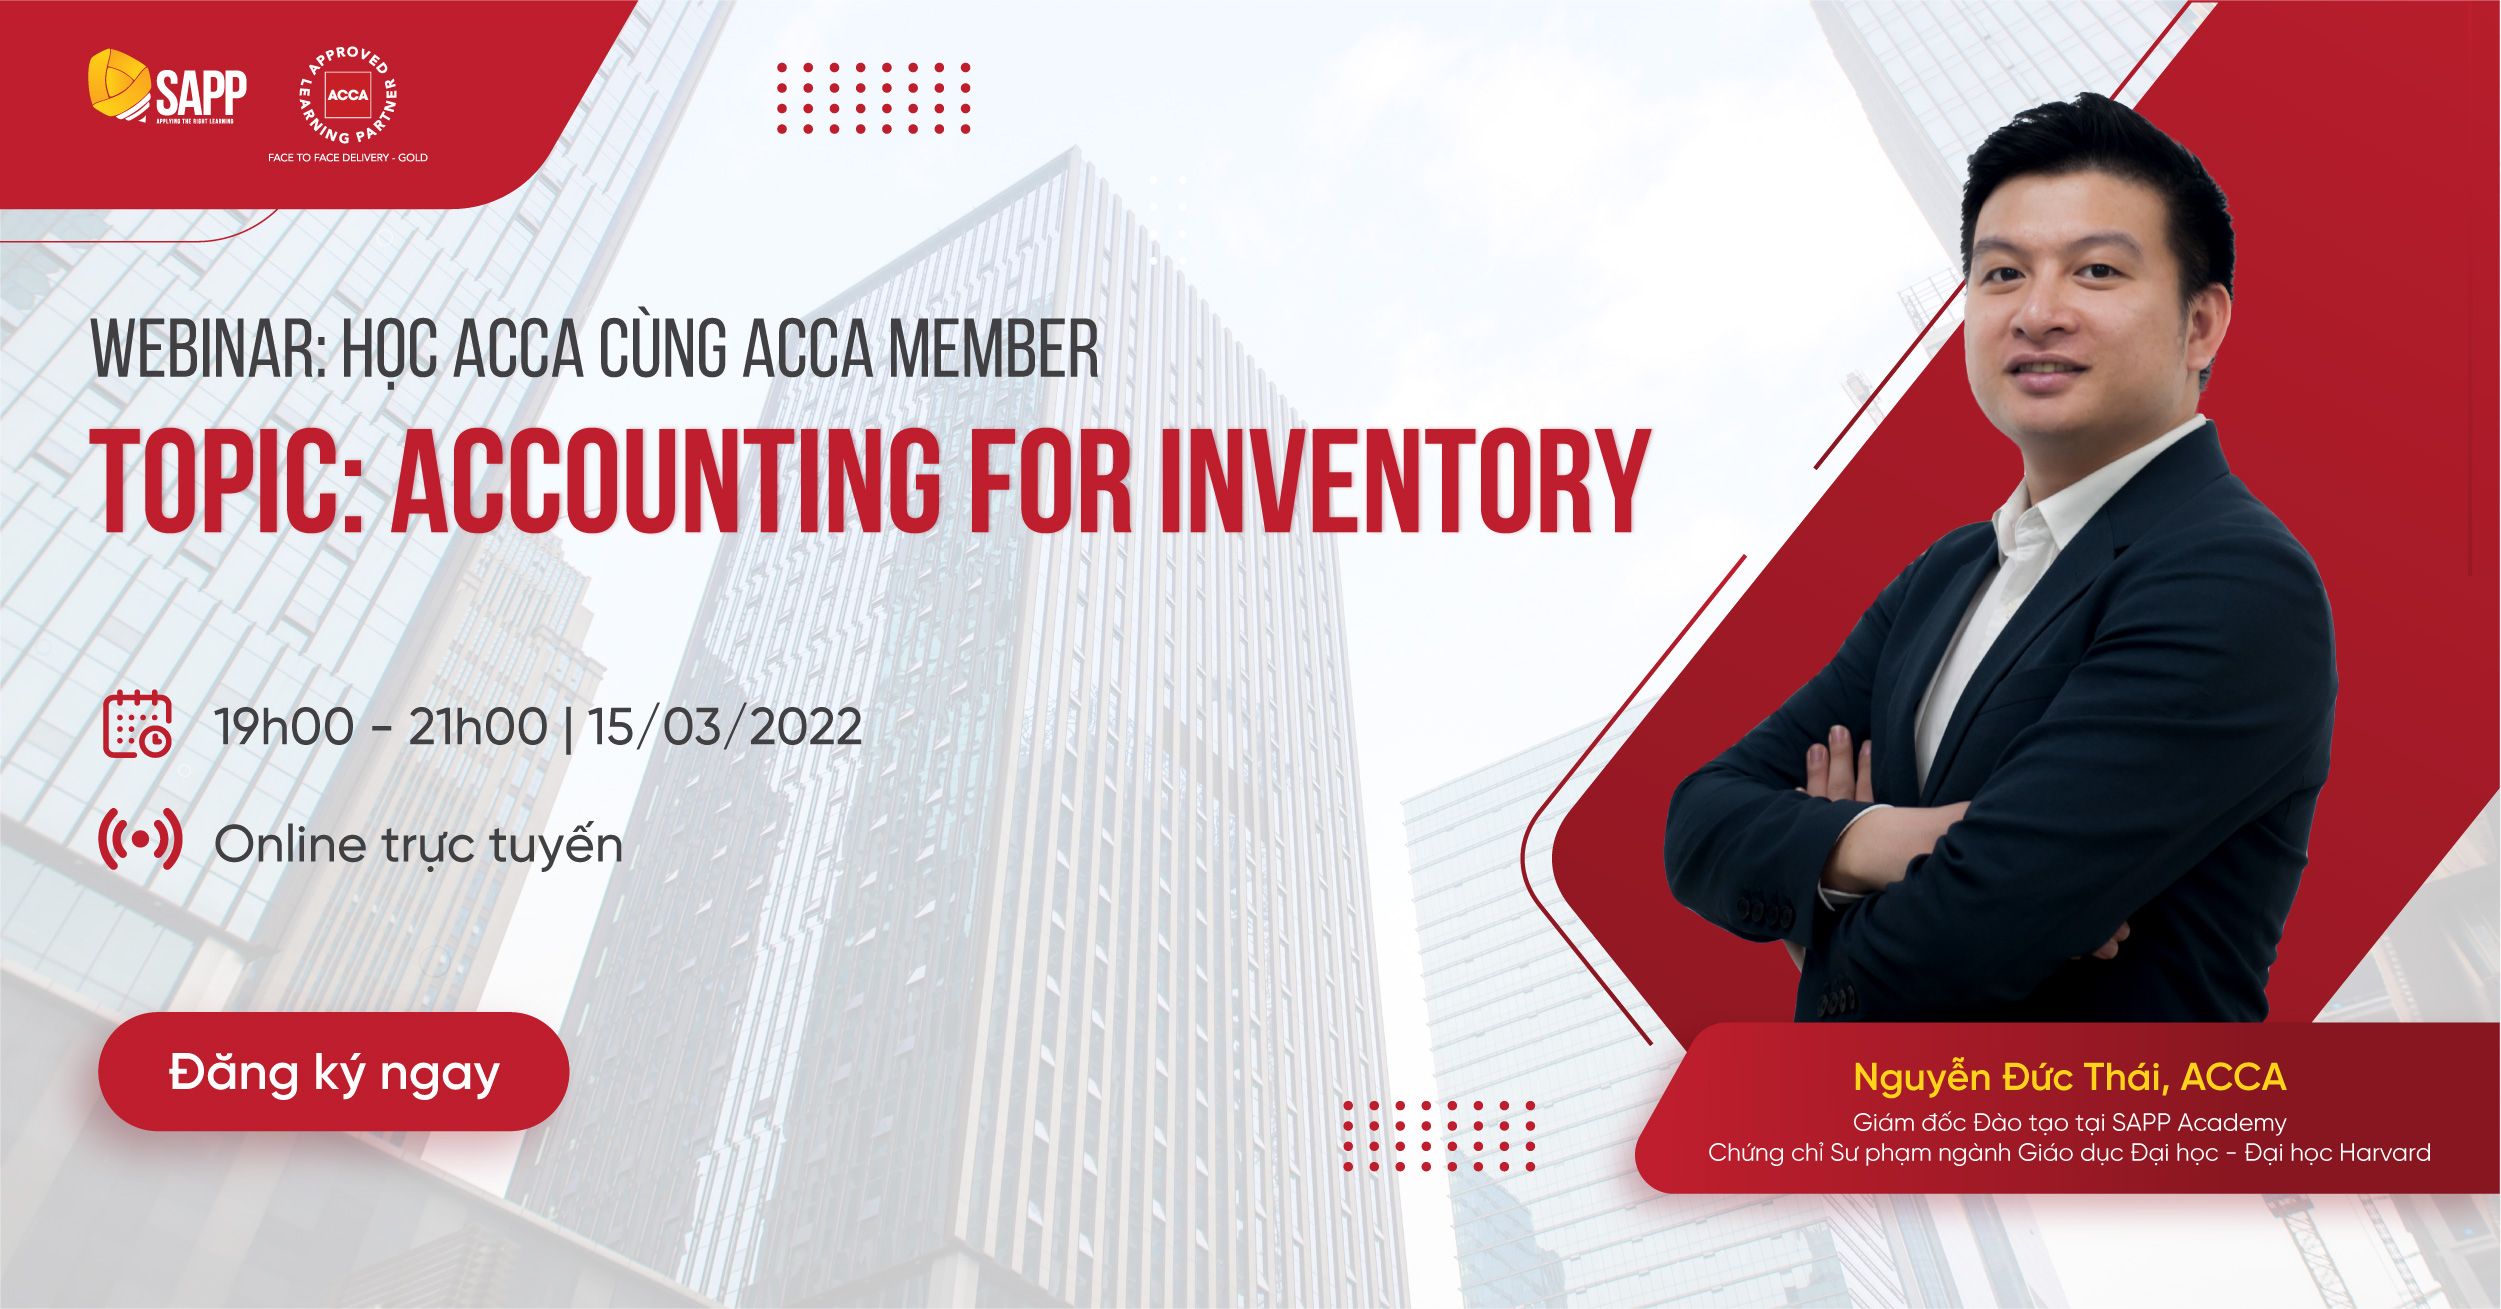 ACCA_HỌC FA/F3 ACCA CÙNG ACCA MEMBER - TOPIC: ACCOUNTING FOR INVENTORY